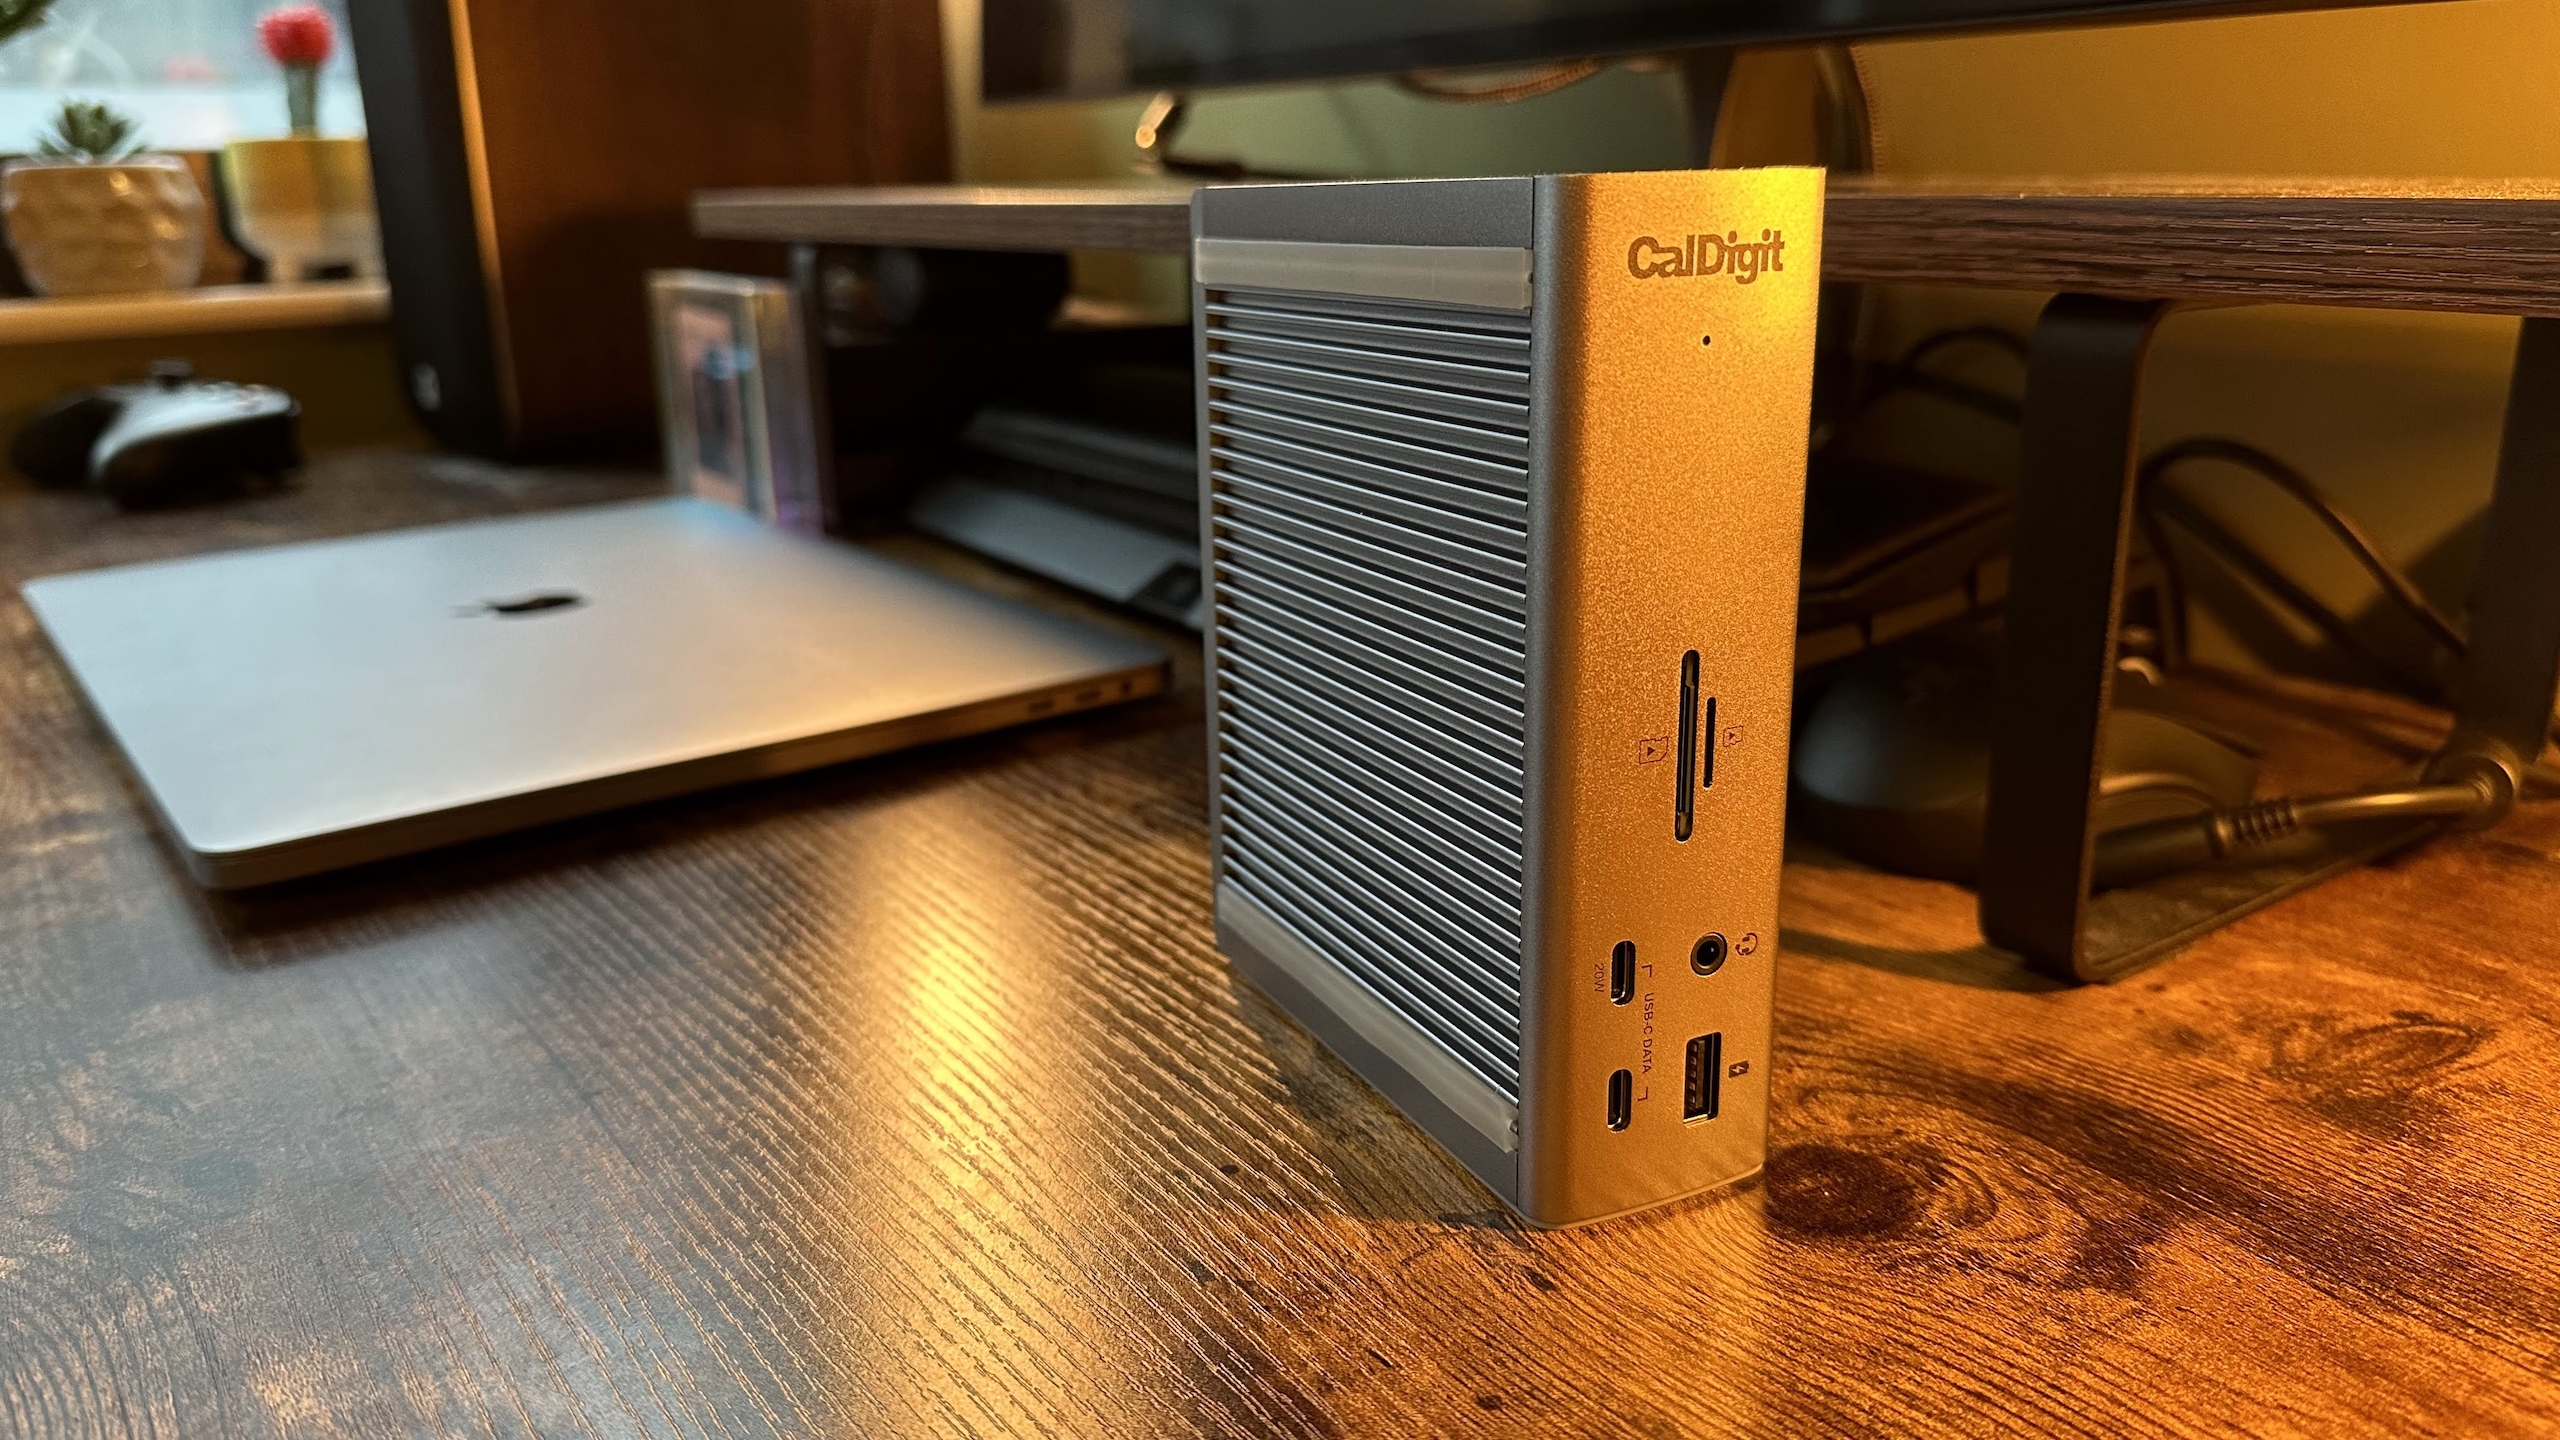 CalDigit TS4 Thunderbolt 4 dock review: All the ports you could ever need